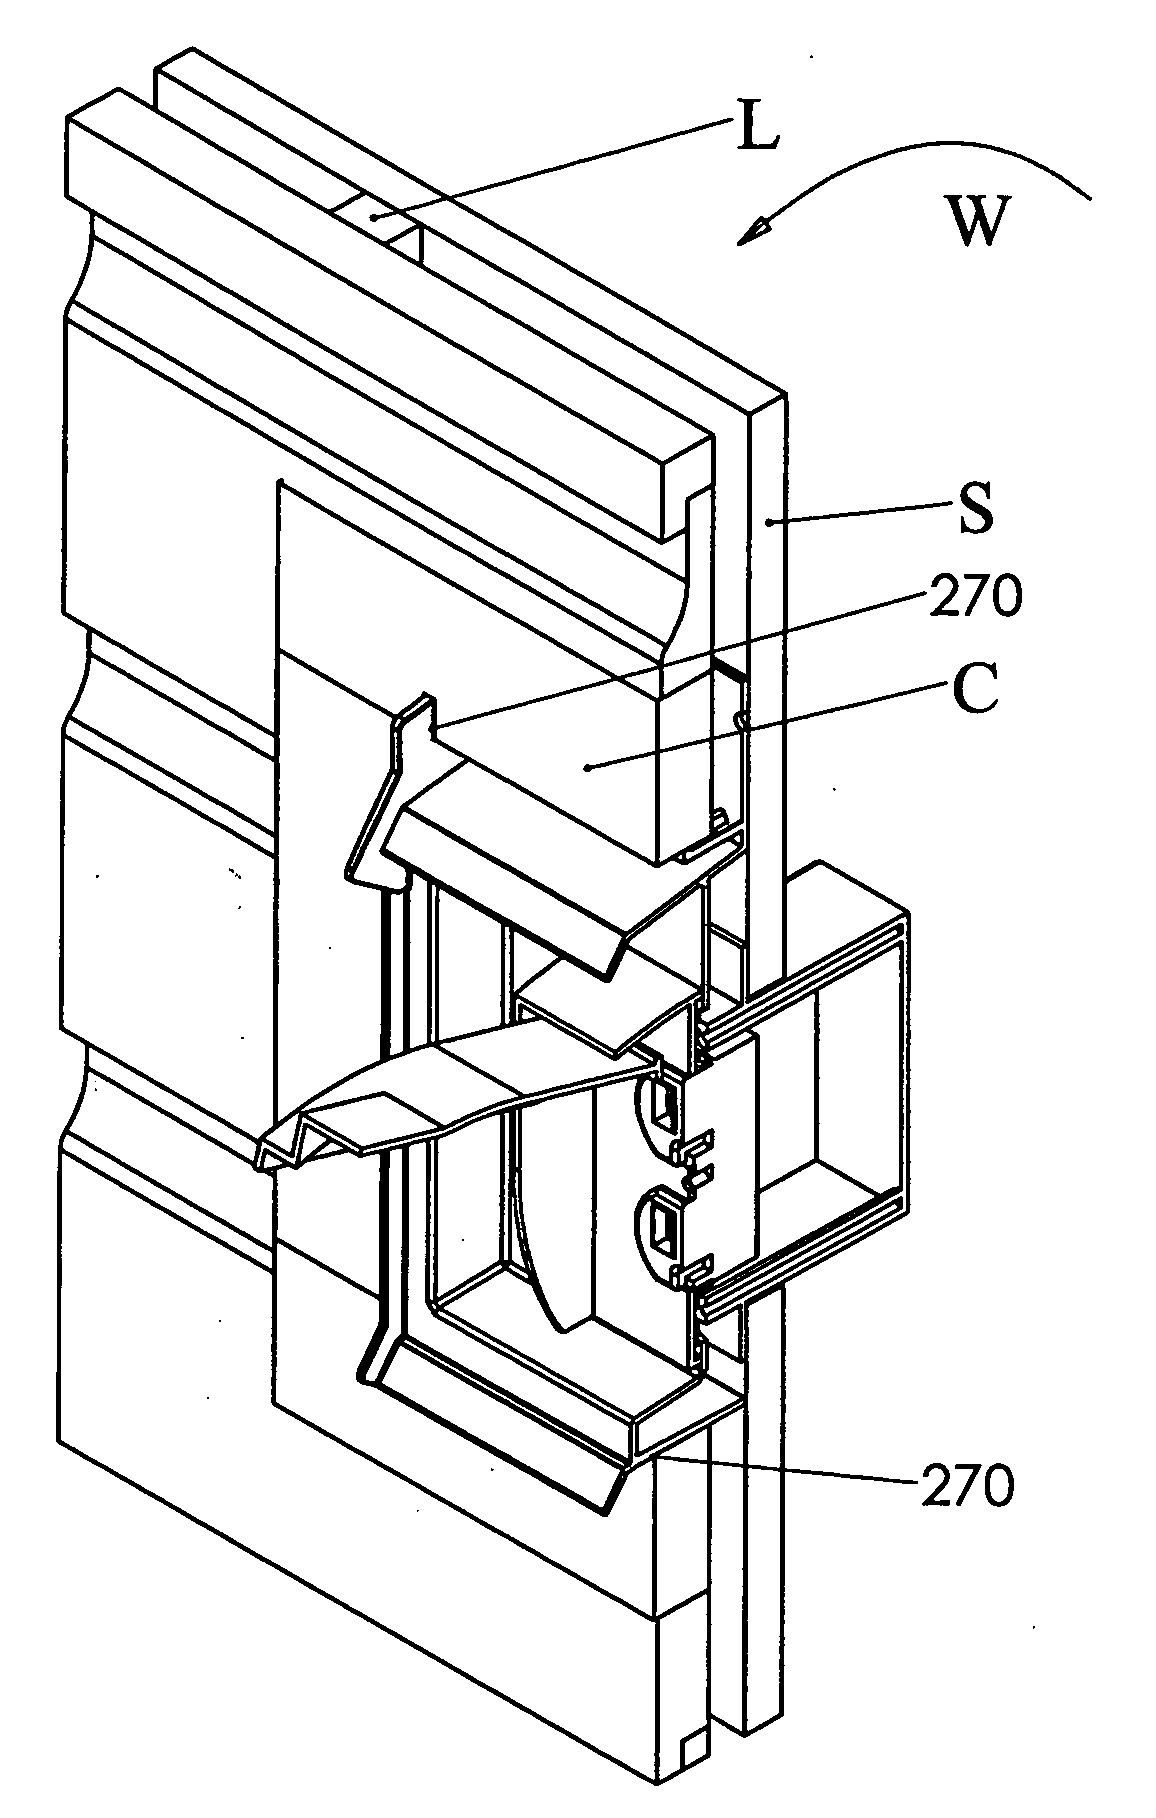 Water deviation unit for external wall fixtures